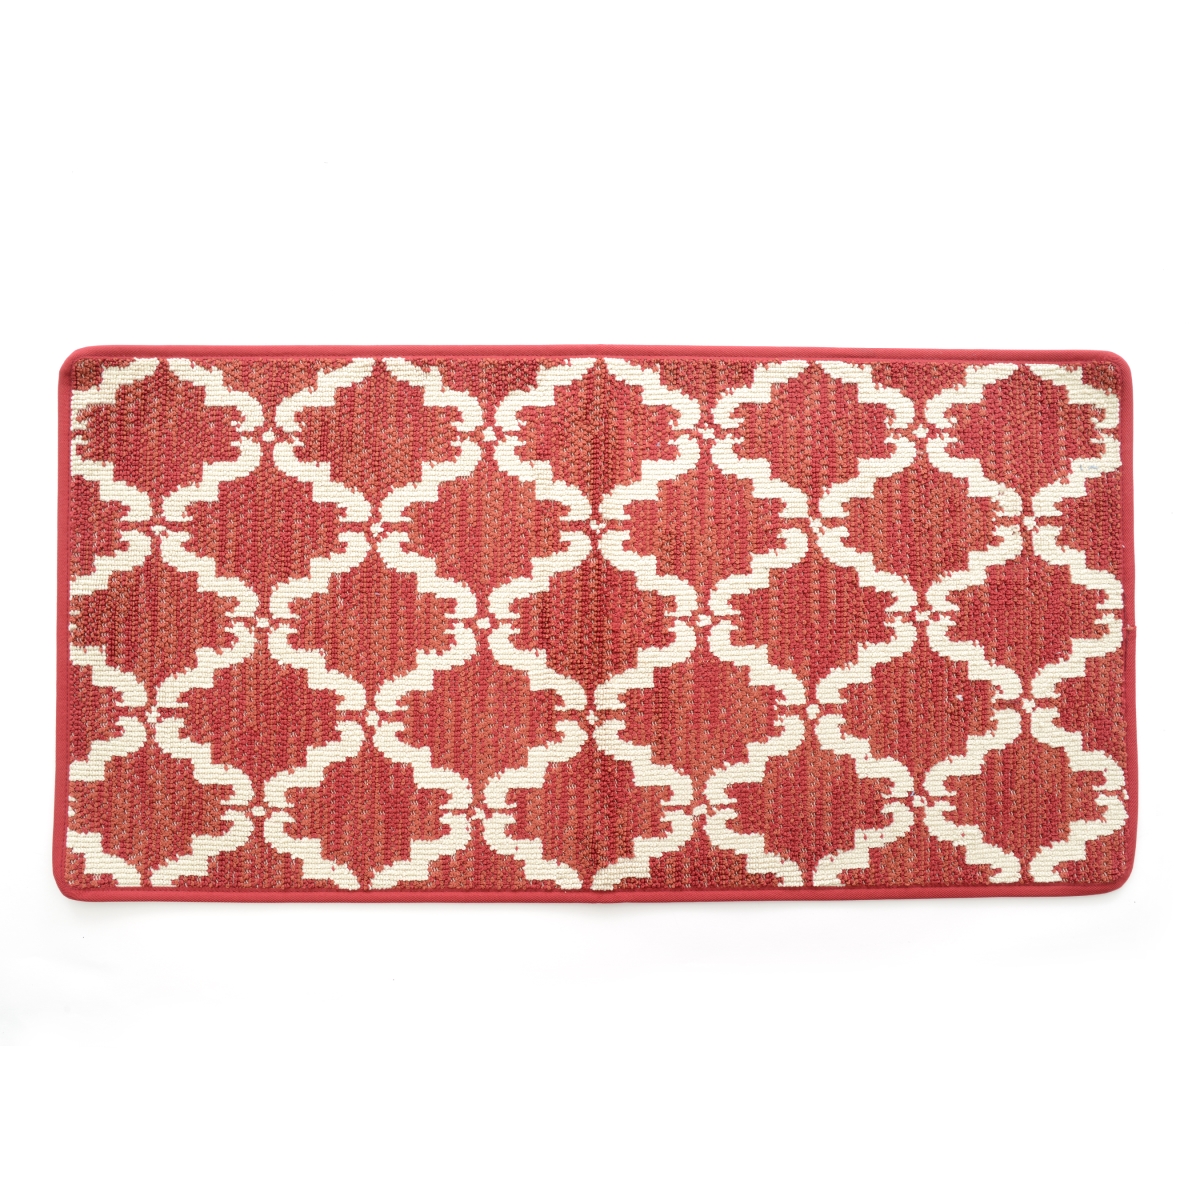 39n-kpl232-12 20 X 39 In. Ultra Plush Pacific Knitted Loop Pile Polyester Bath Mat - Red